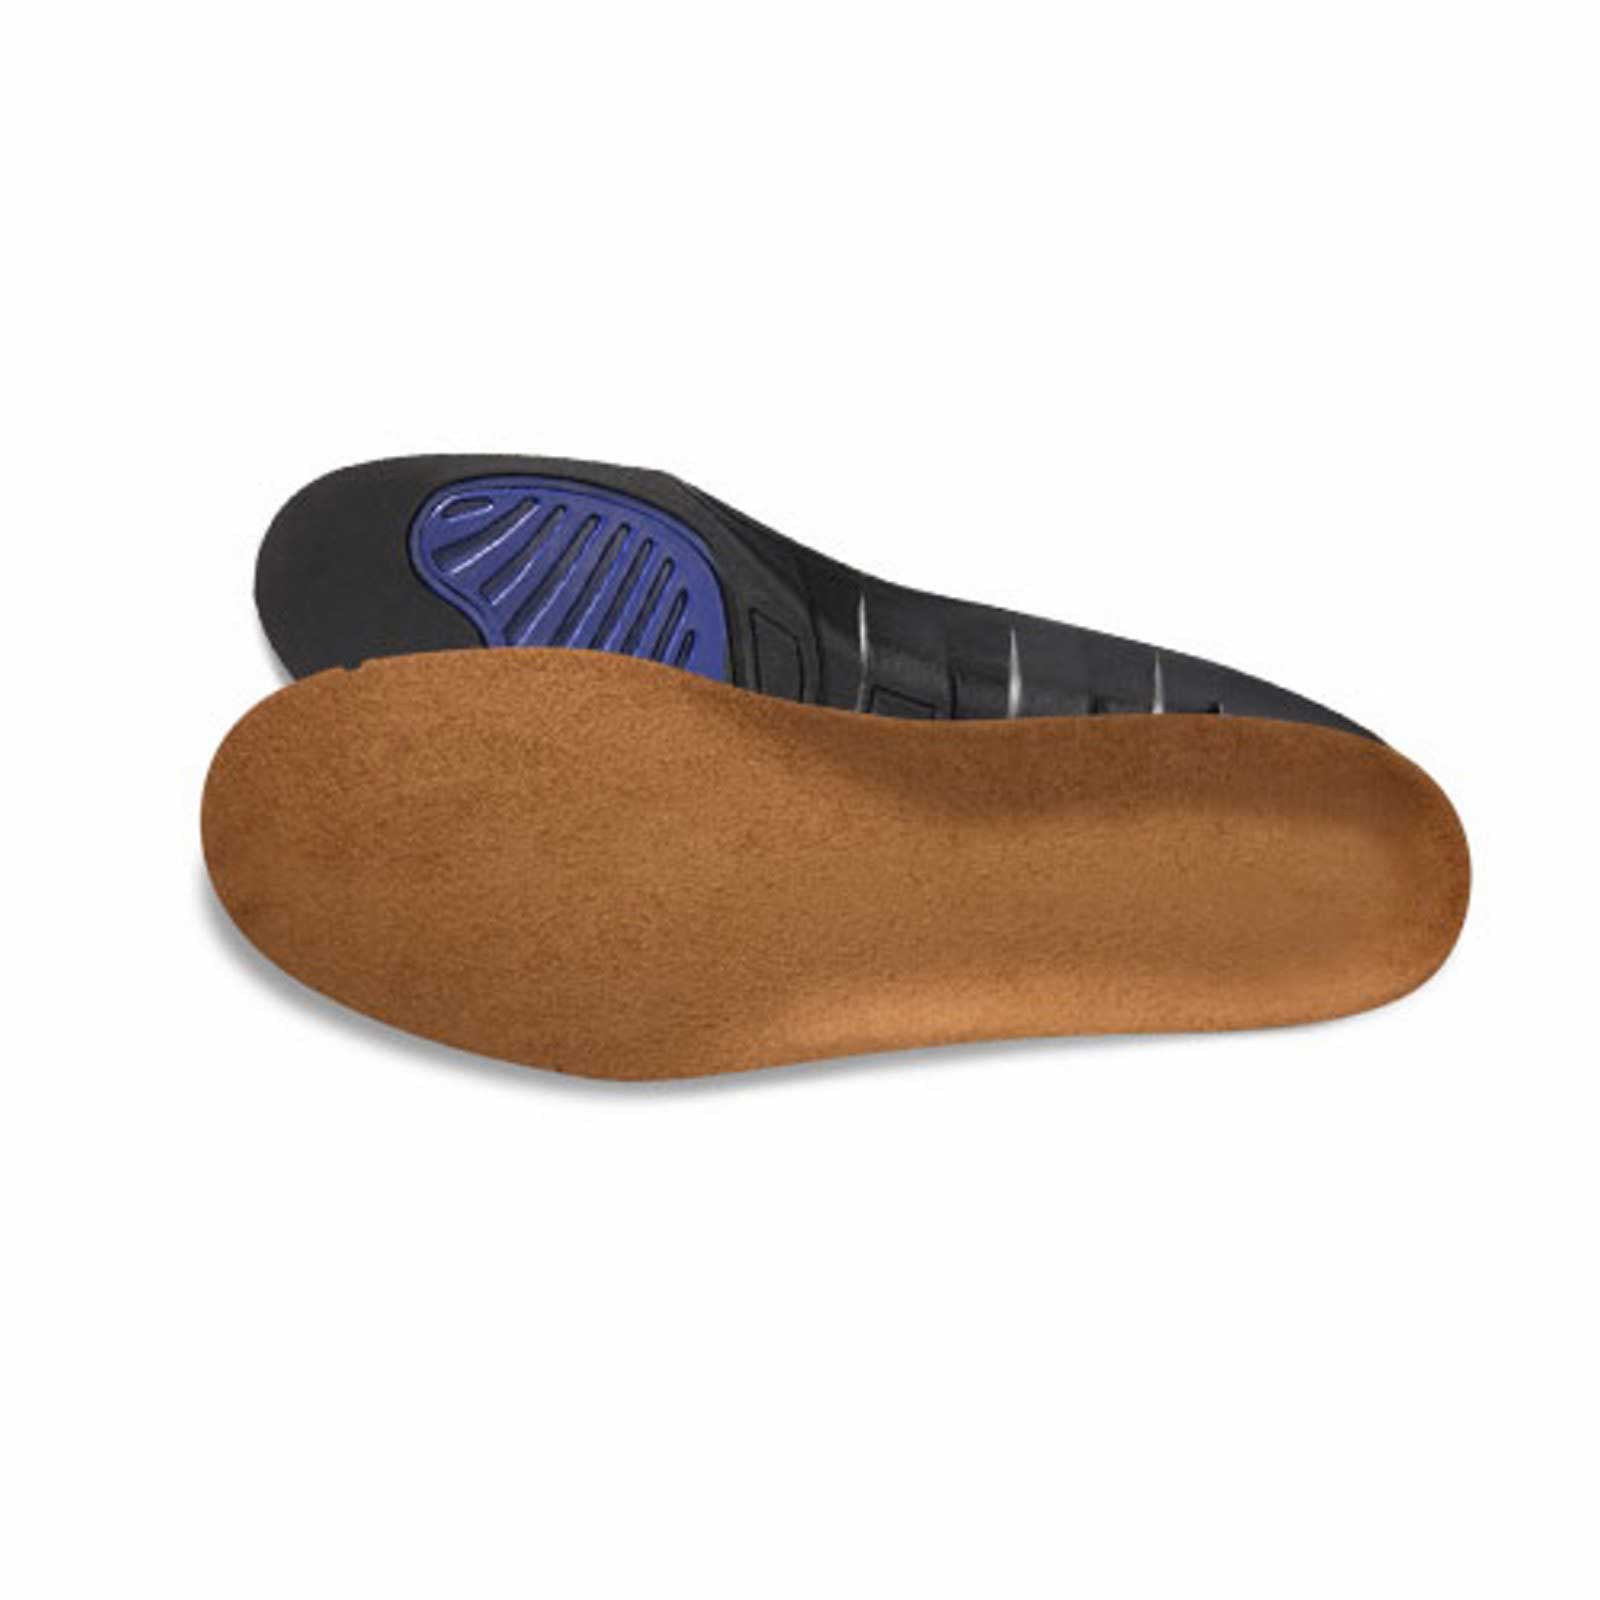 Dr. Comfort - Men's Gel Plus Shoe Inserts For Medial And Lateral Stability - Medium - (1 Pair)